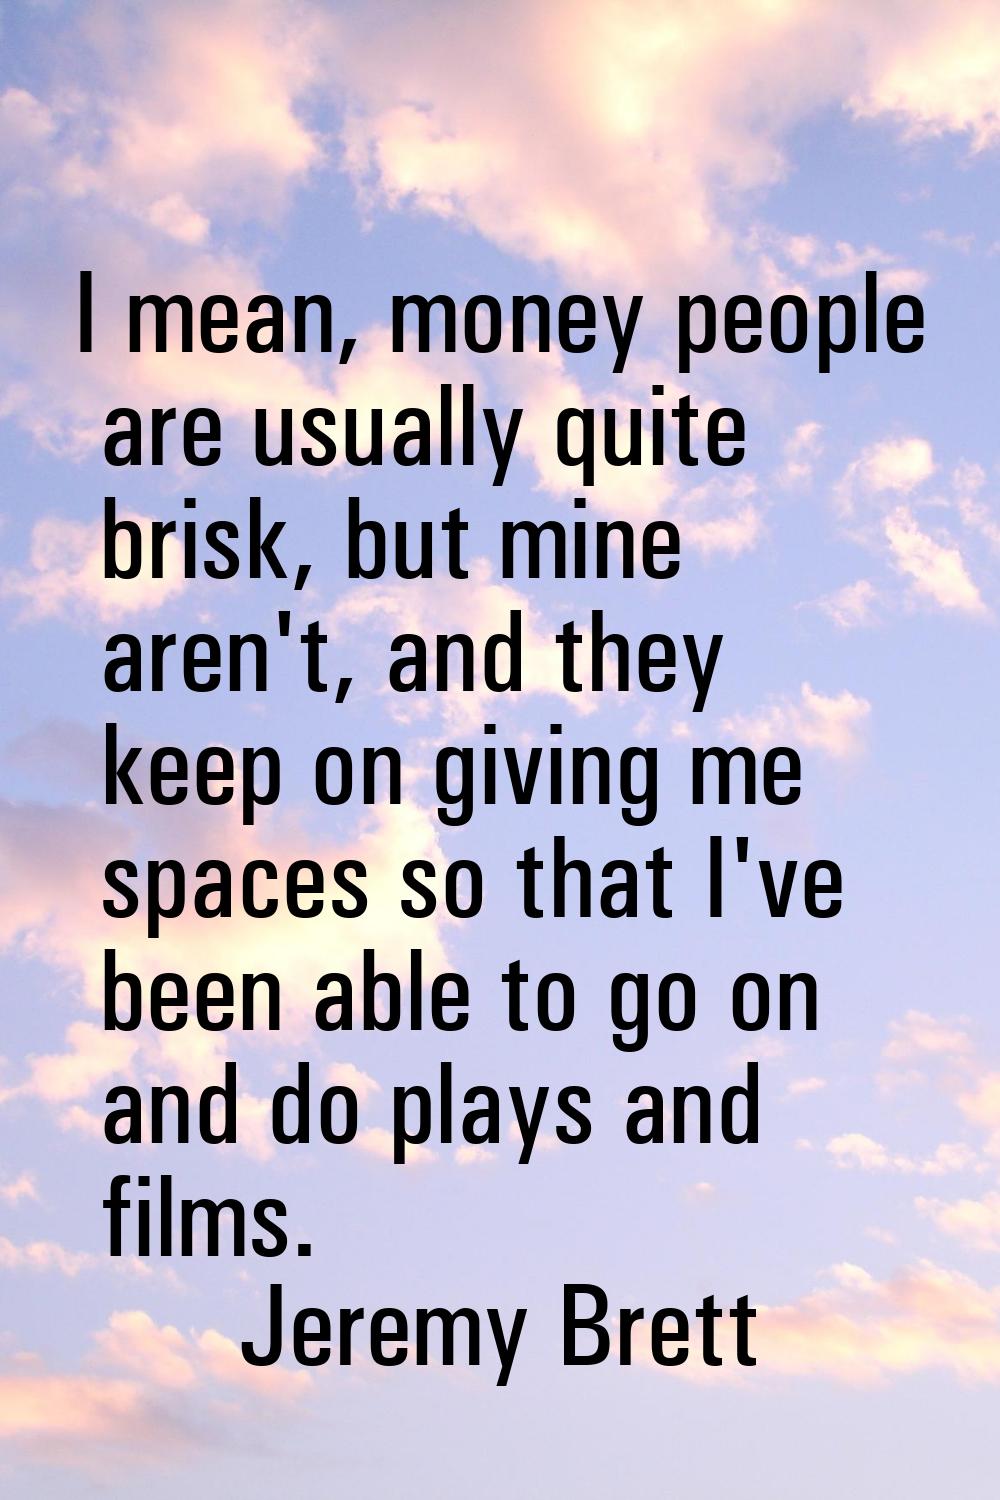 I mean, money people are usually quite brisk, but mine aren't, and they keep on giving me spaces so